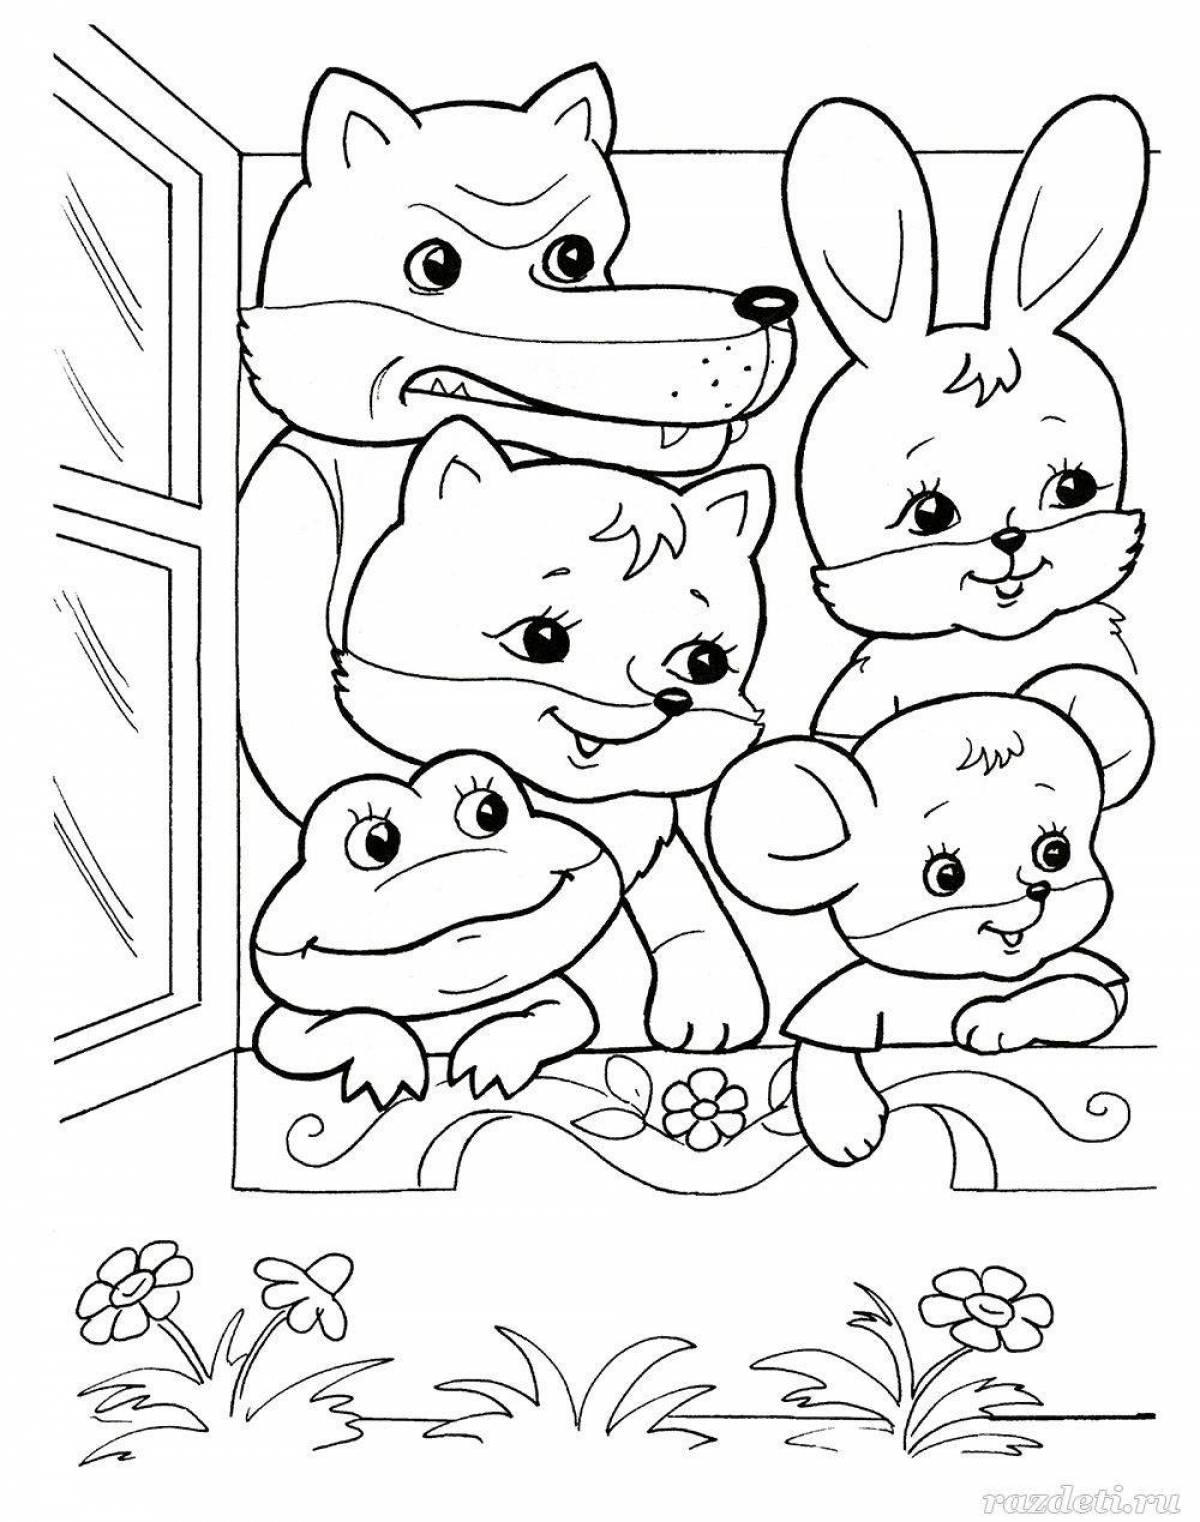 Live coloring teremok fairy tale